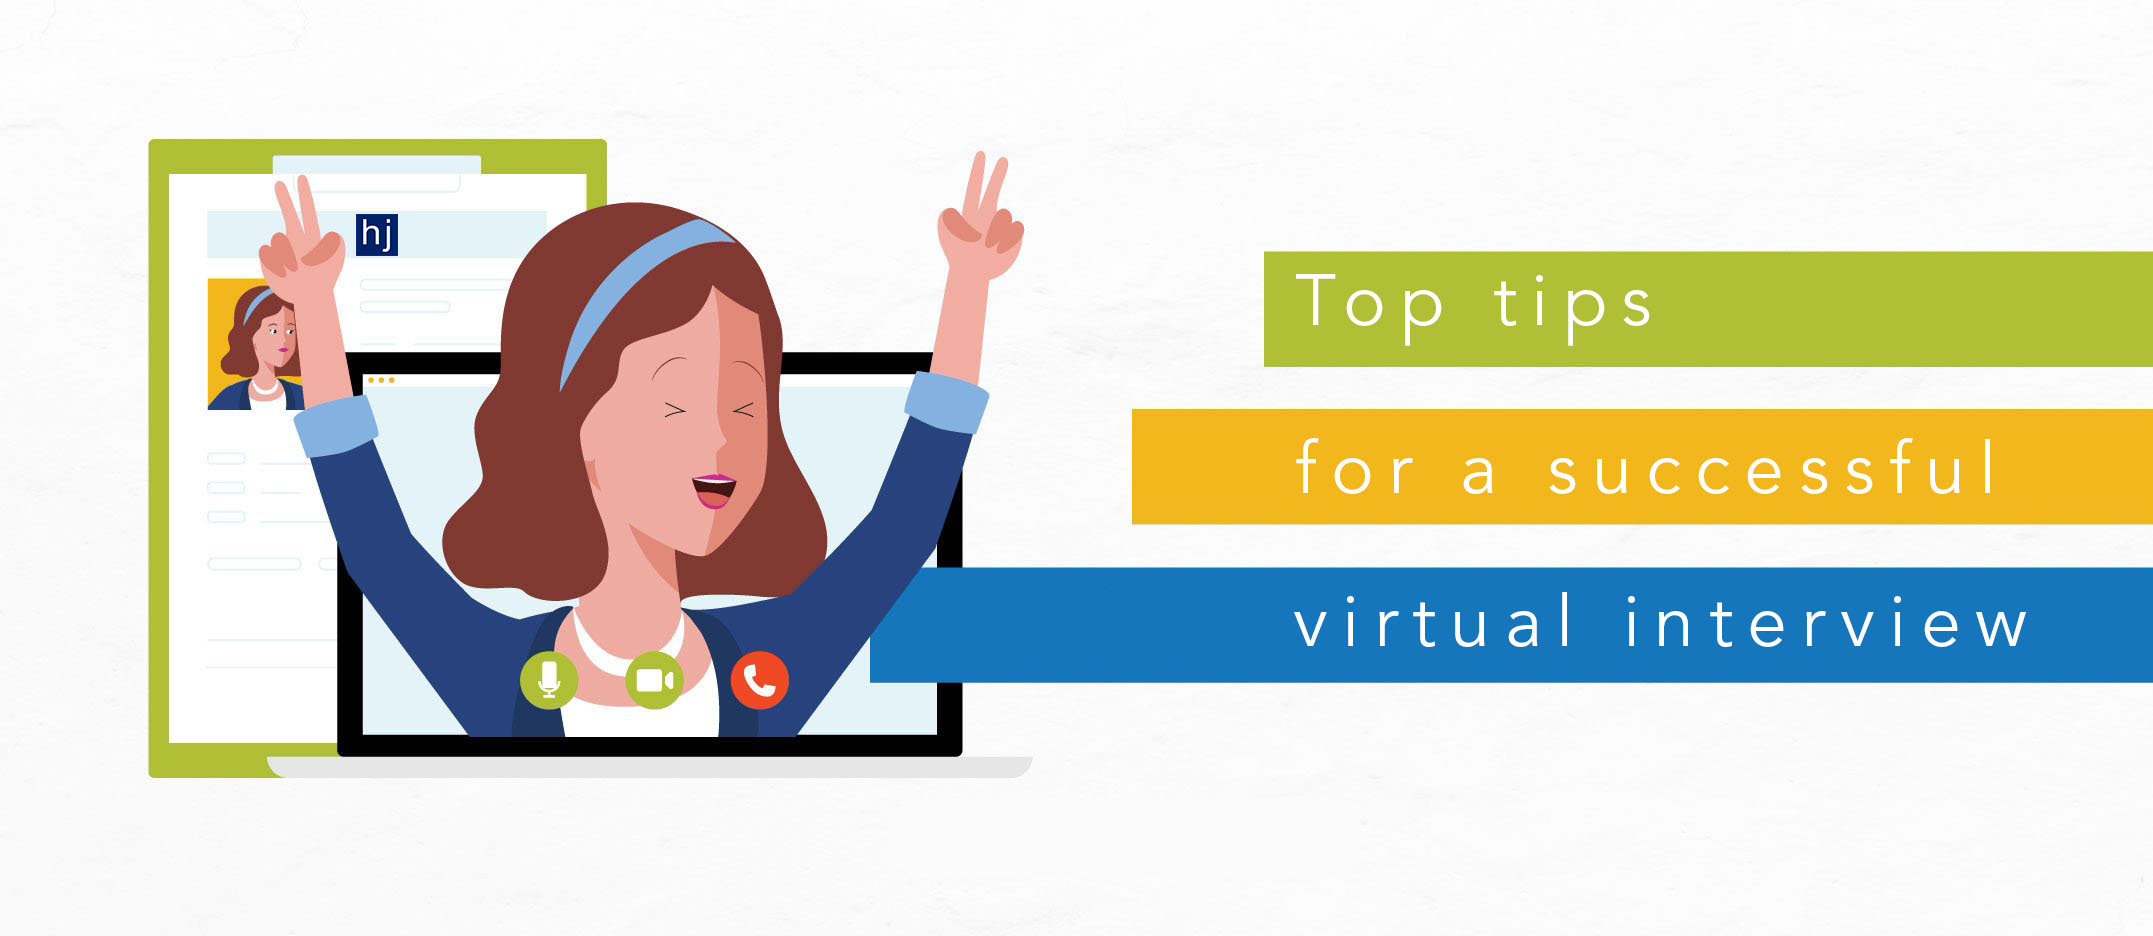 10 tips for a successful virtual interview